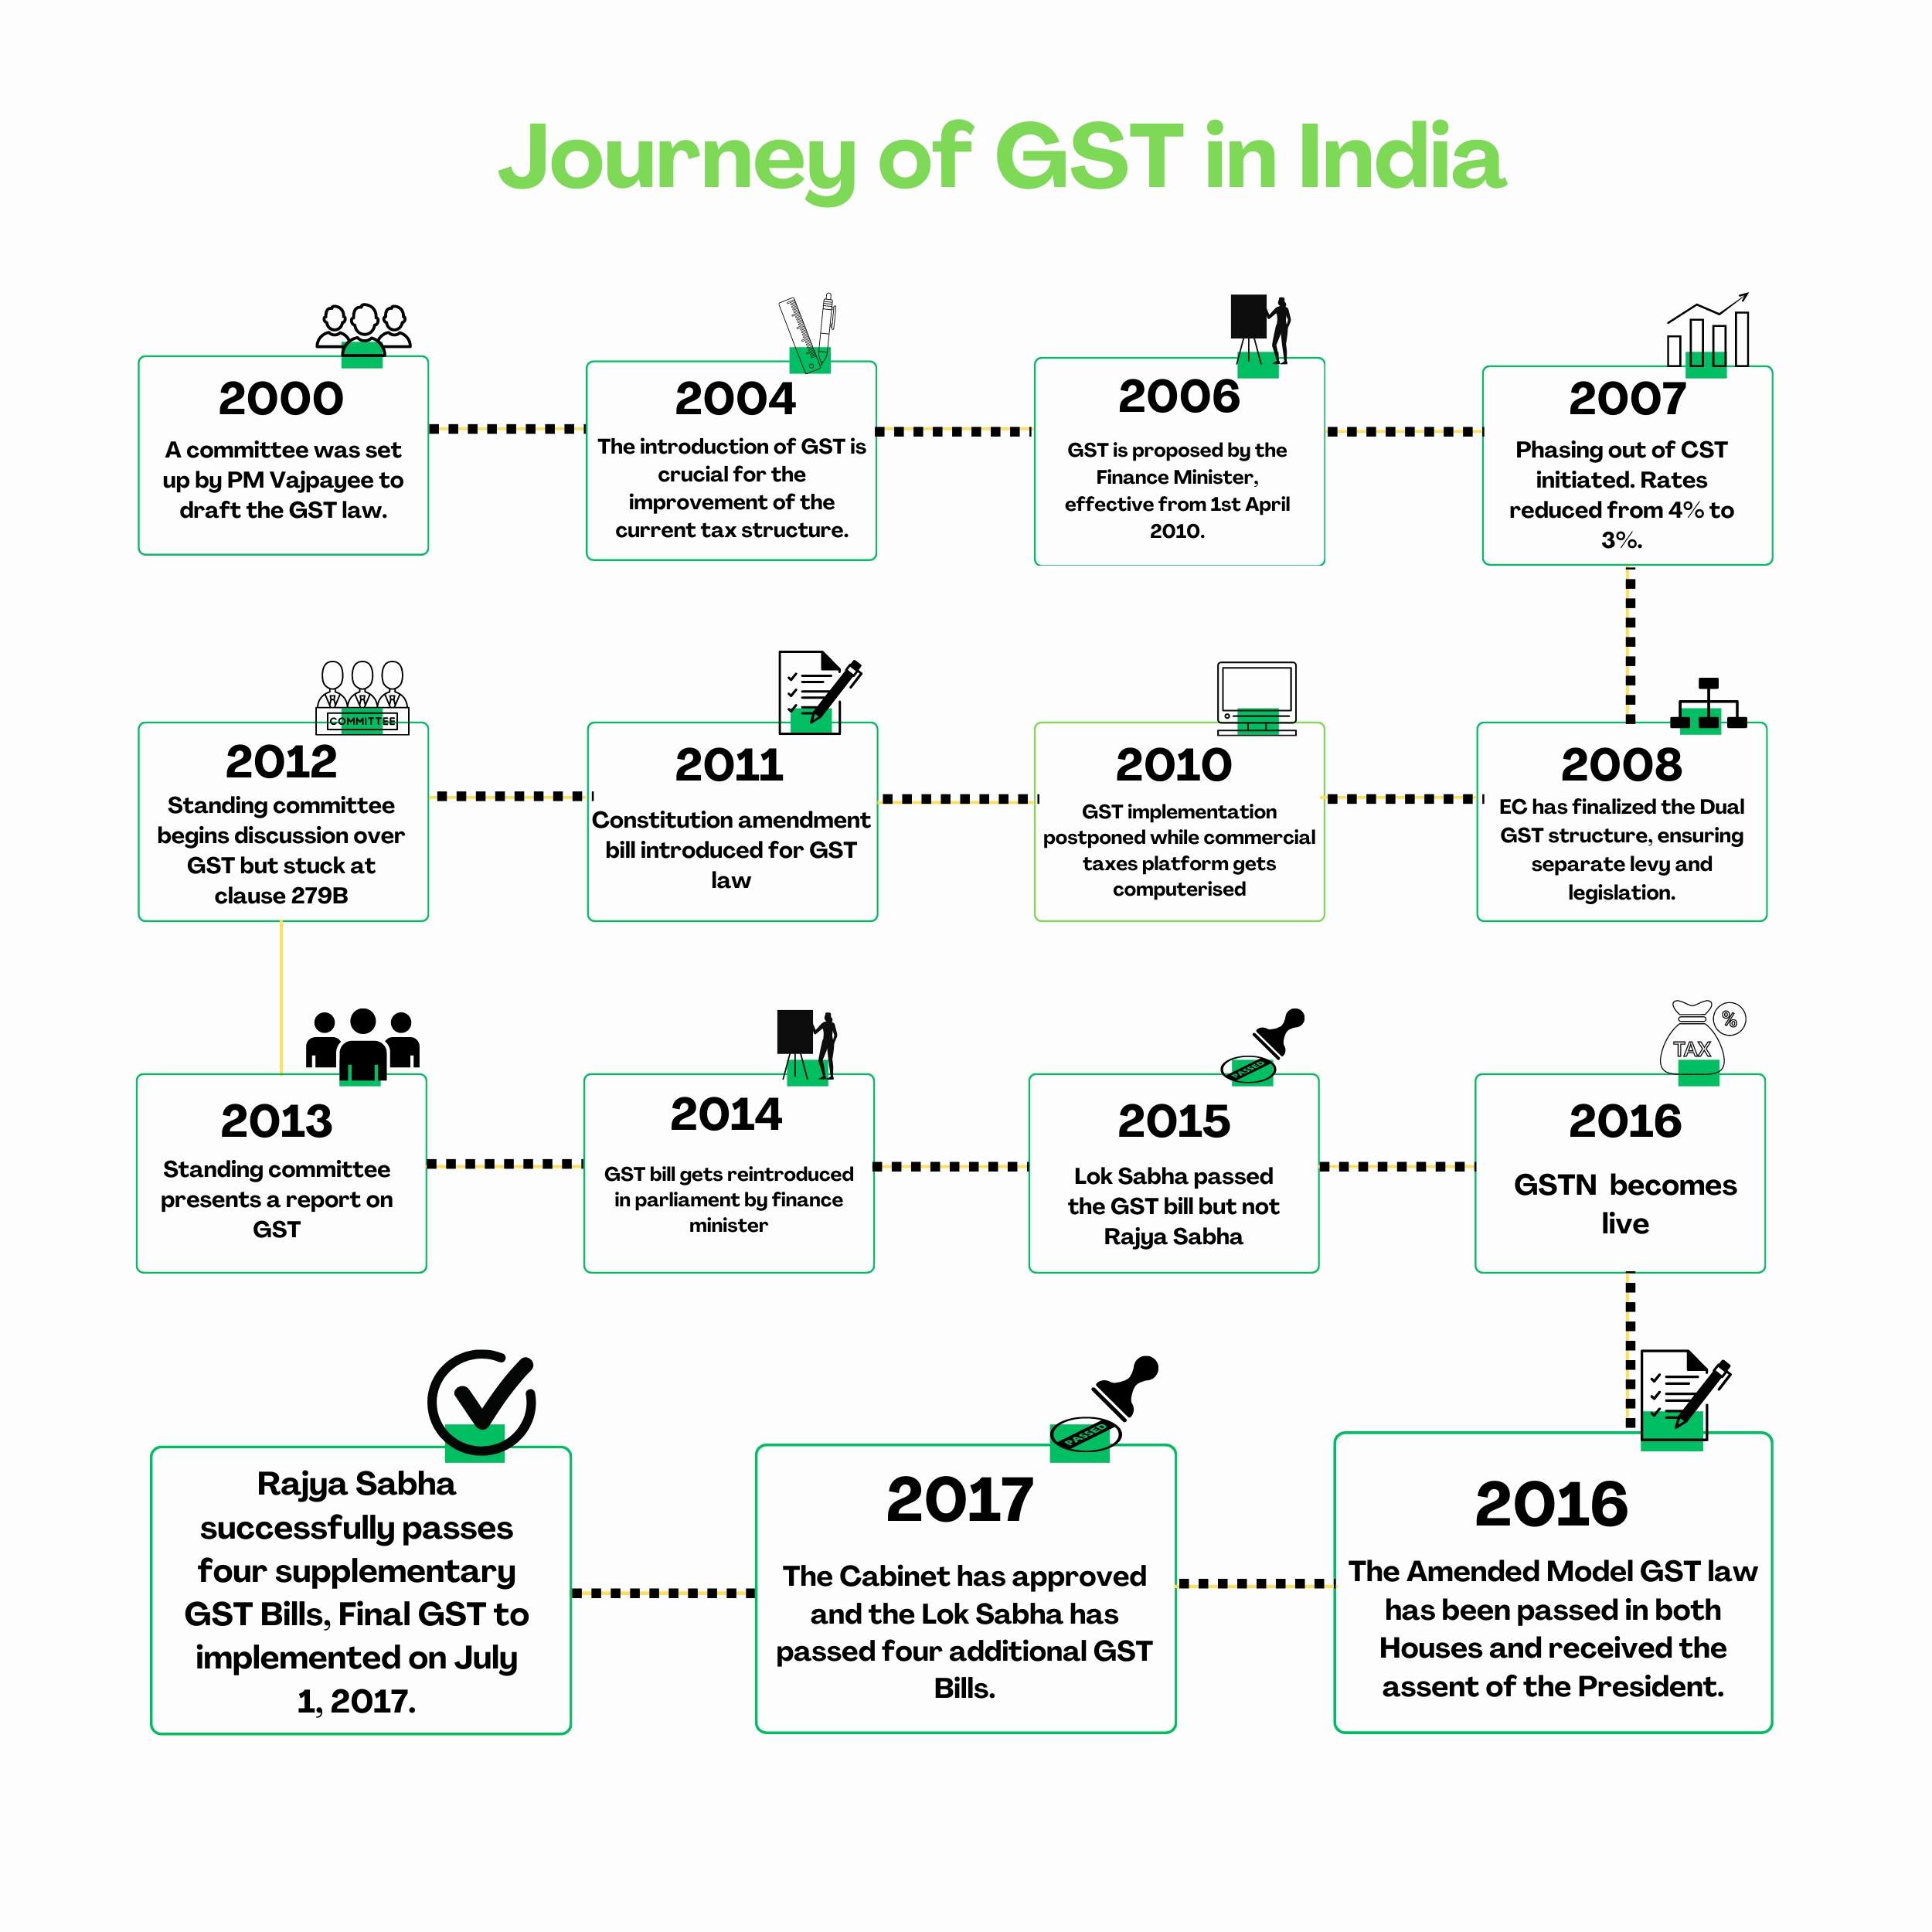 Journey of GST in India